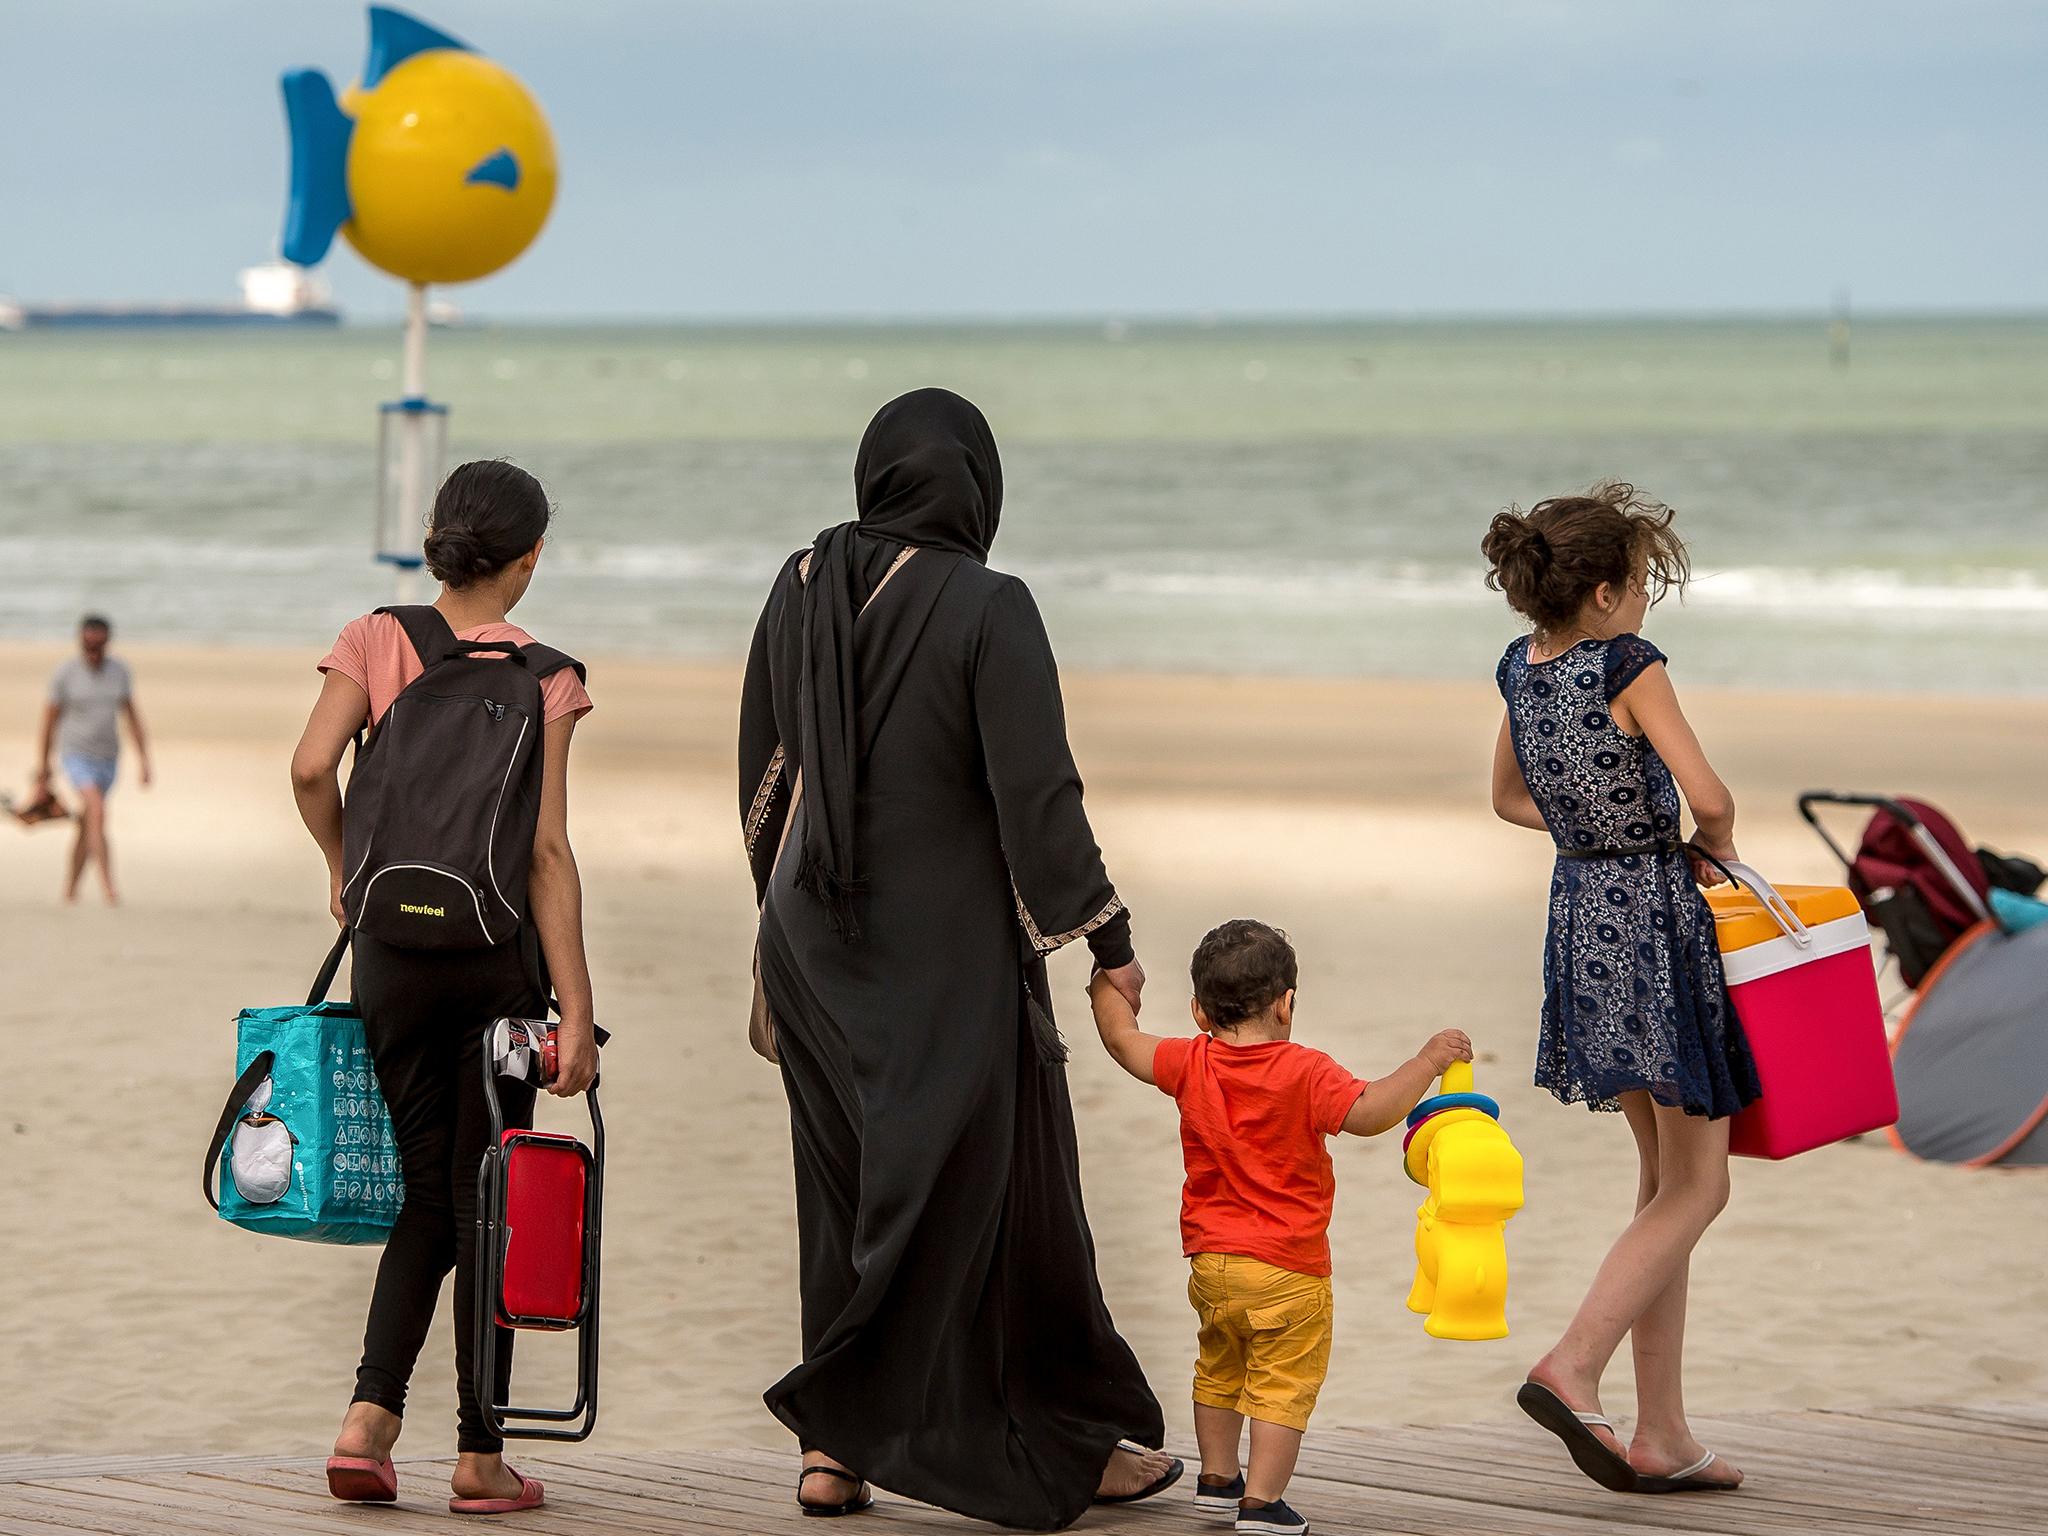 File photo of a woman wearing the abaya and walking with children on a beach in Malo-Les-bains, northern France in 2016